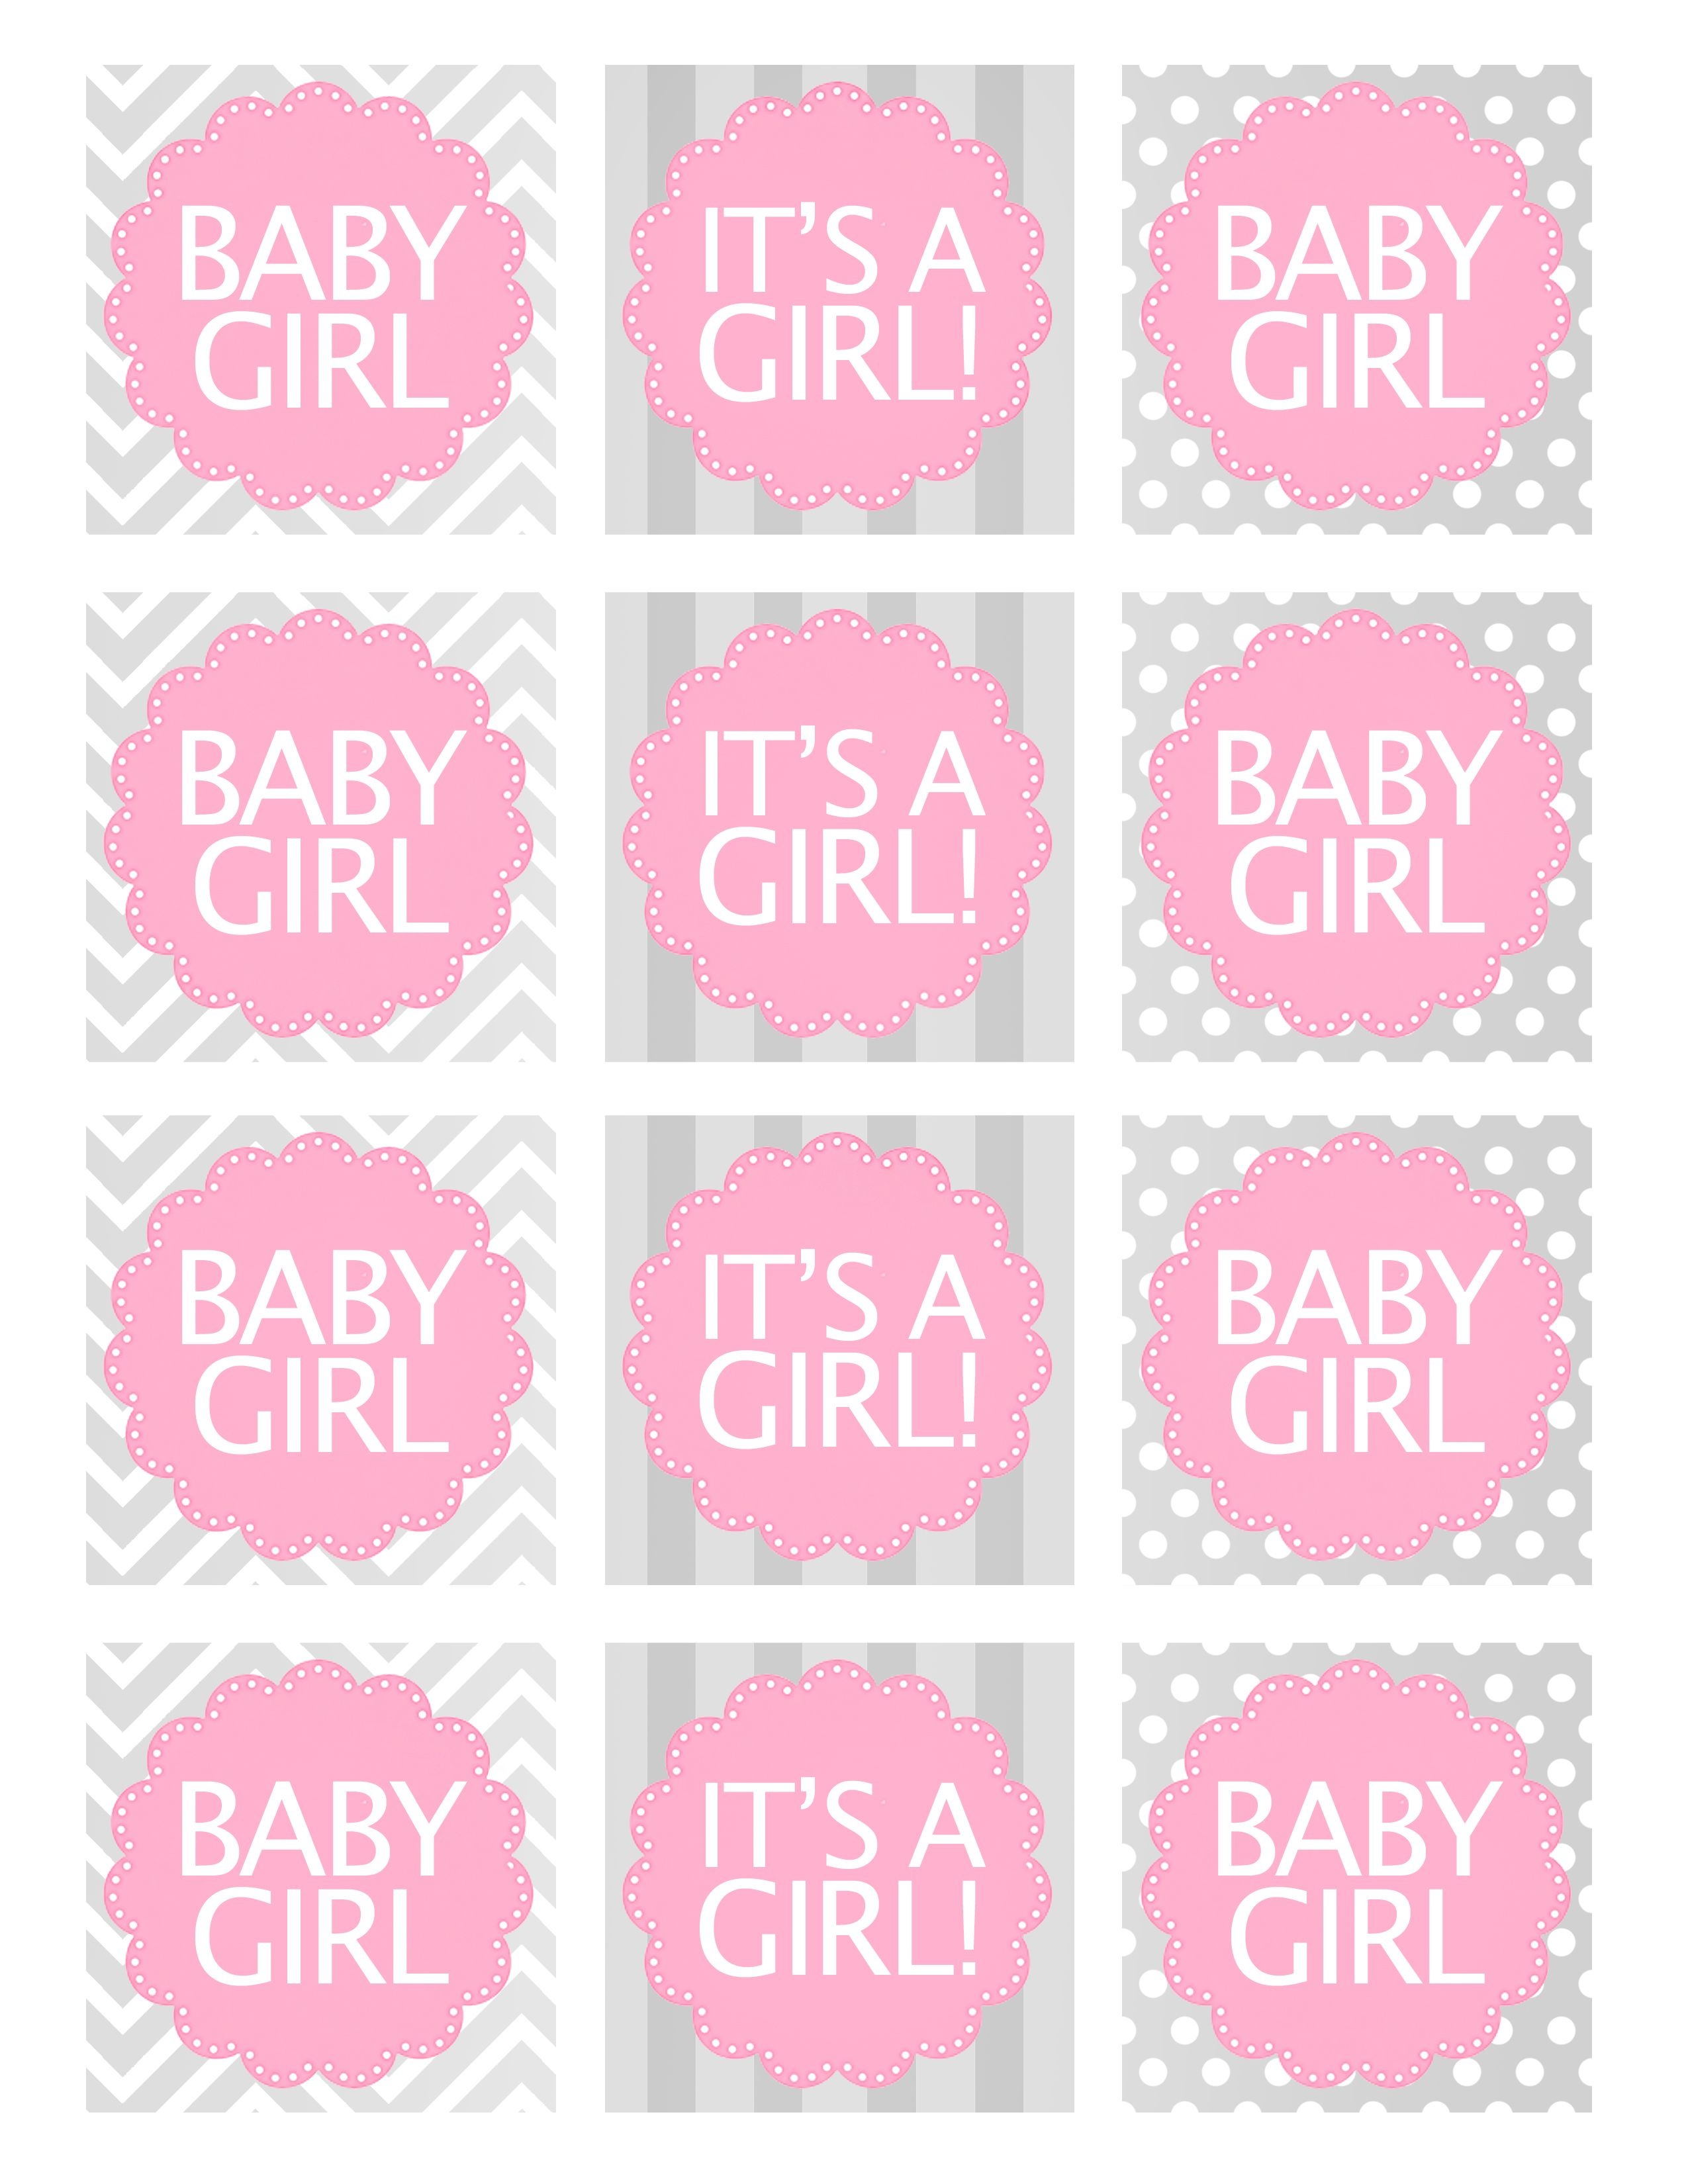 Baby Girl Shower Free Printables | Baby Shower Ideas | Baby Shower - Free Printable Baby Shower Label Templates